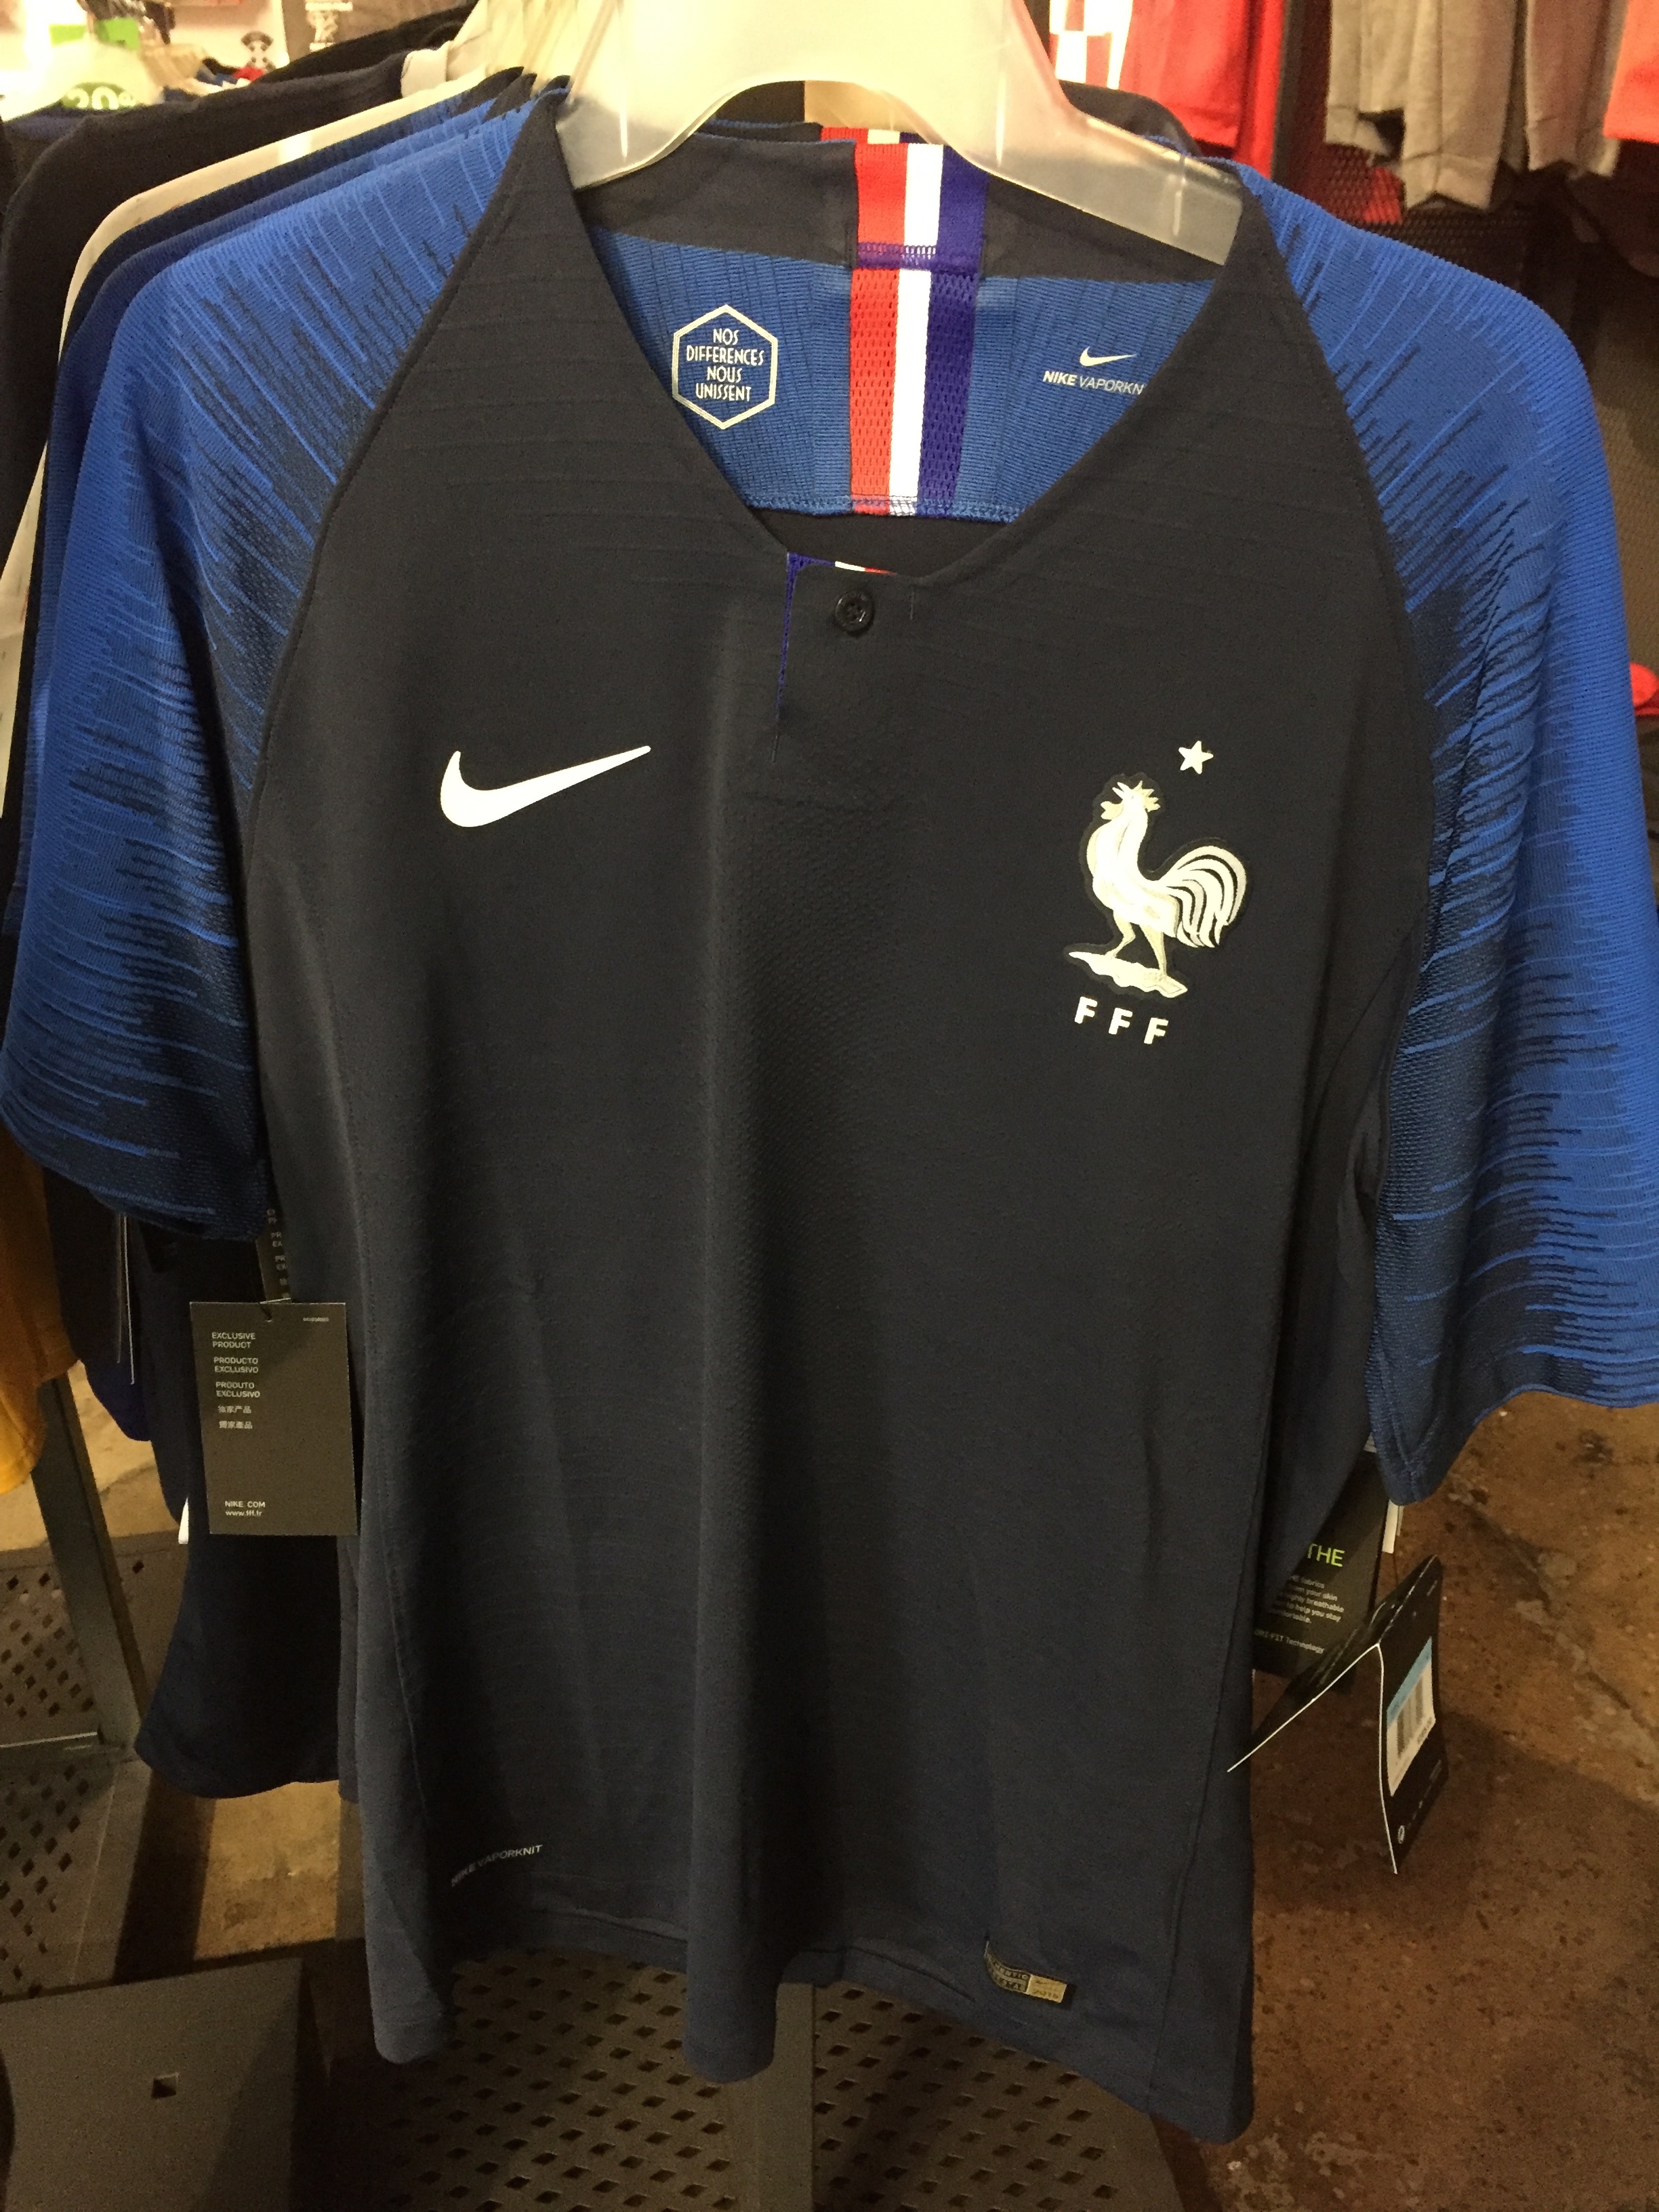 france home jersey 2018